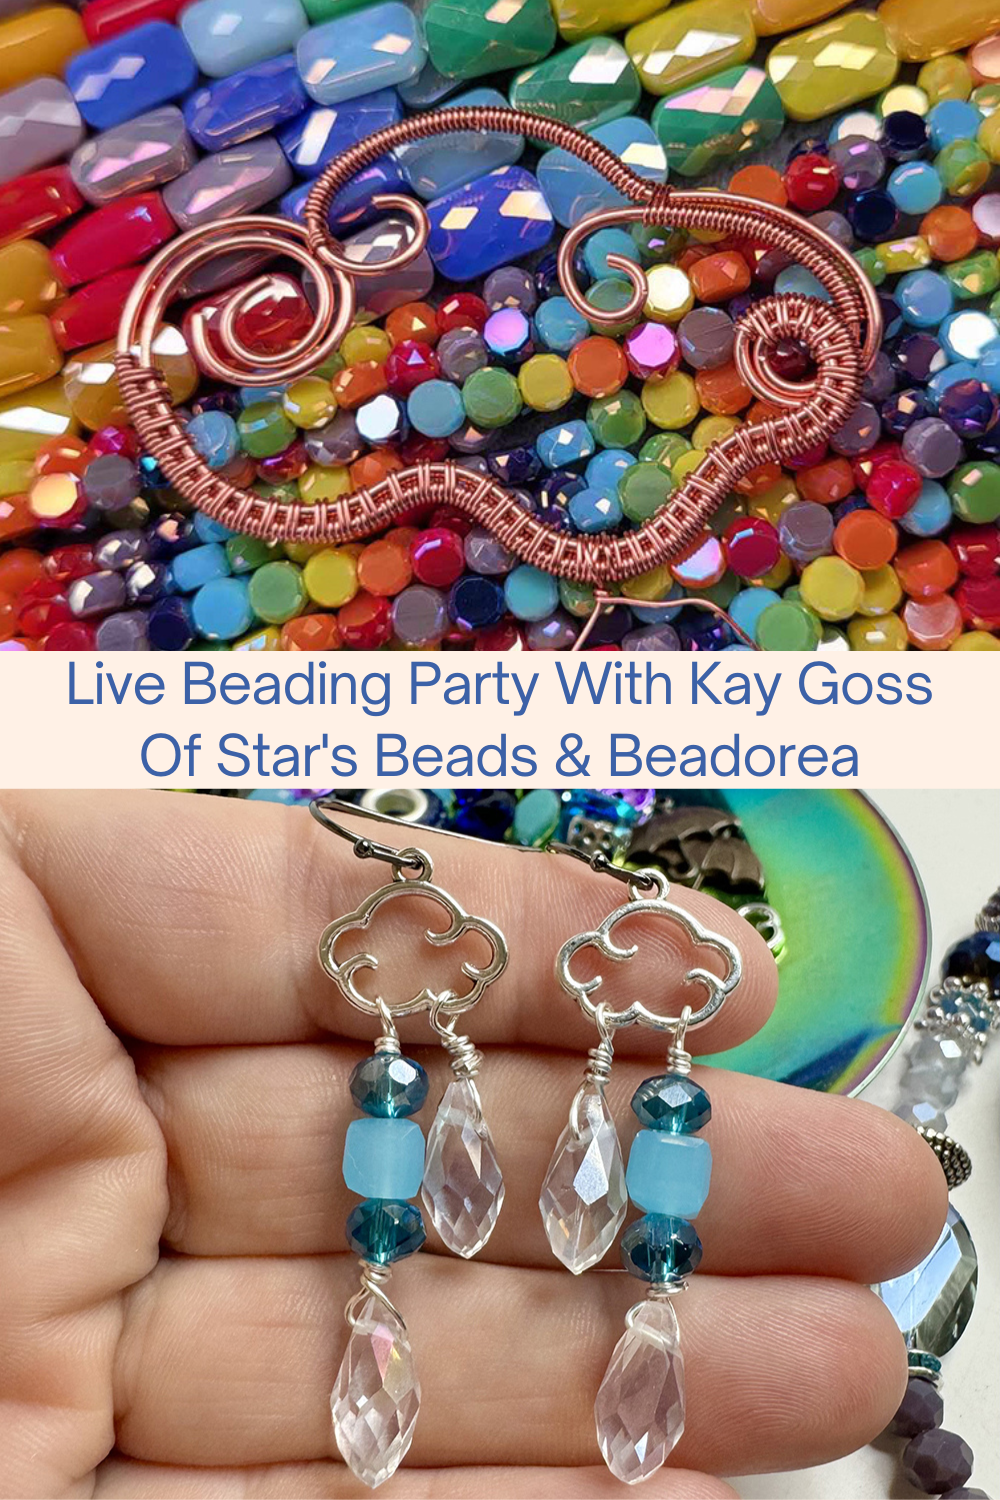 Live Beading Party With Kay Goss Of Star's Beads & Beadorea Collage